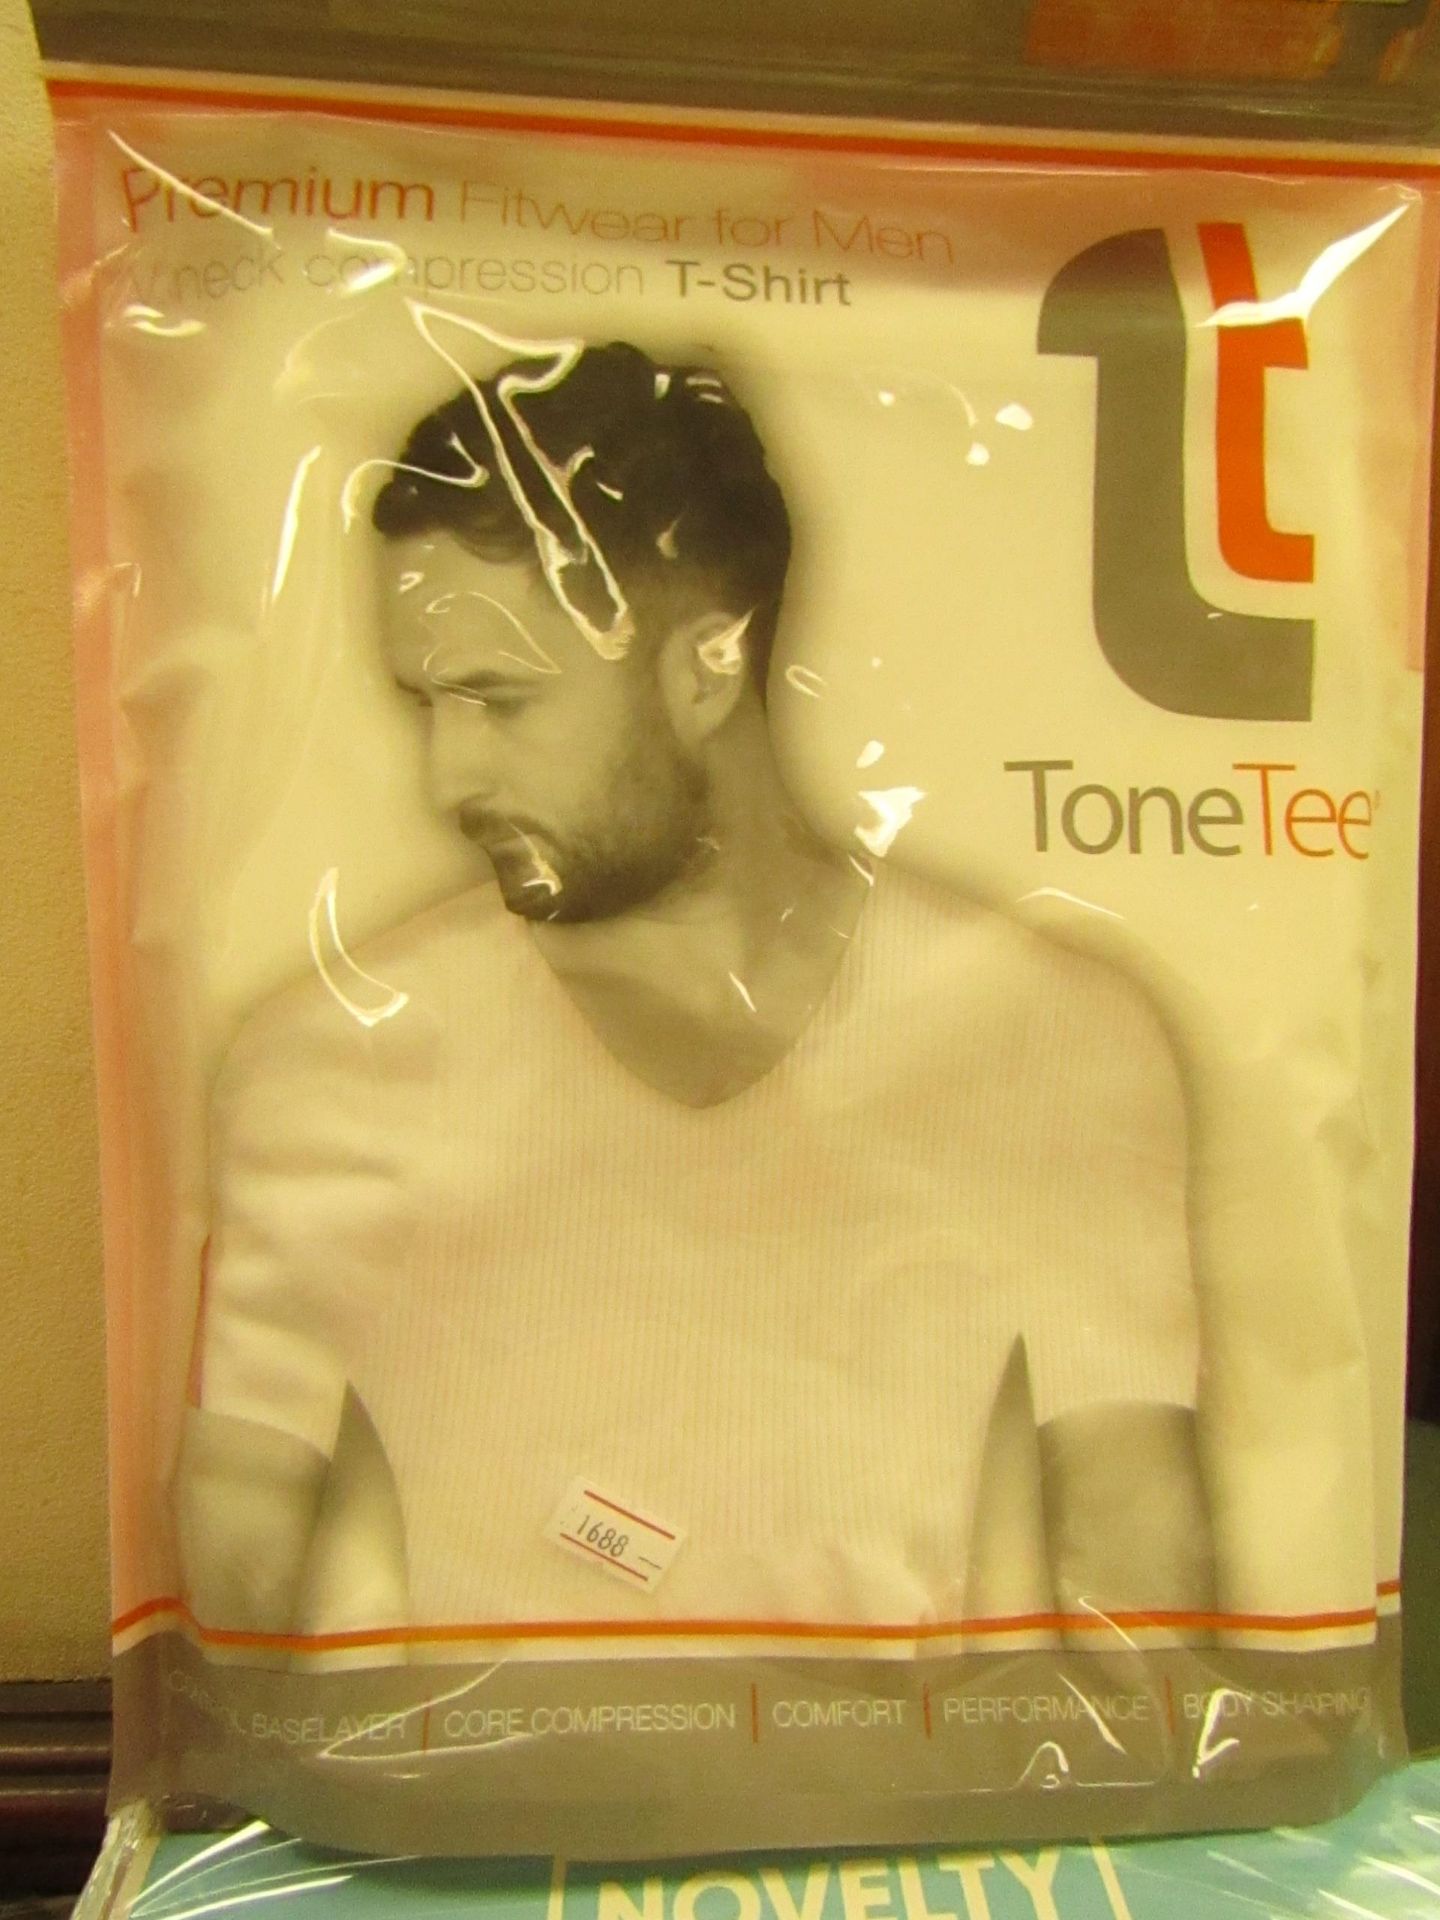 | 1x | MENS TONE TEE NECK COMPRESSION T-SHIRT WHITE SIZE XL | NEW & PACKAGED |